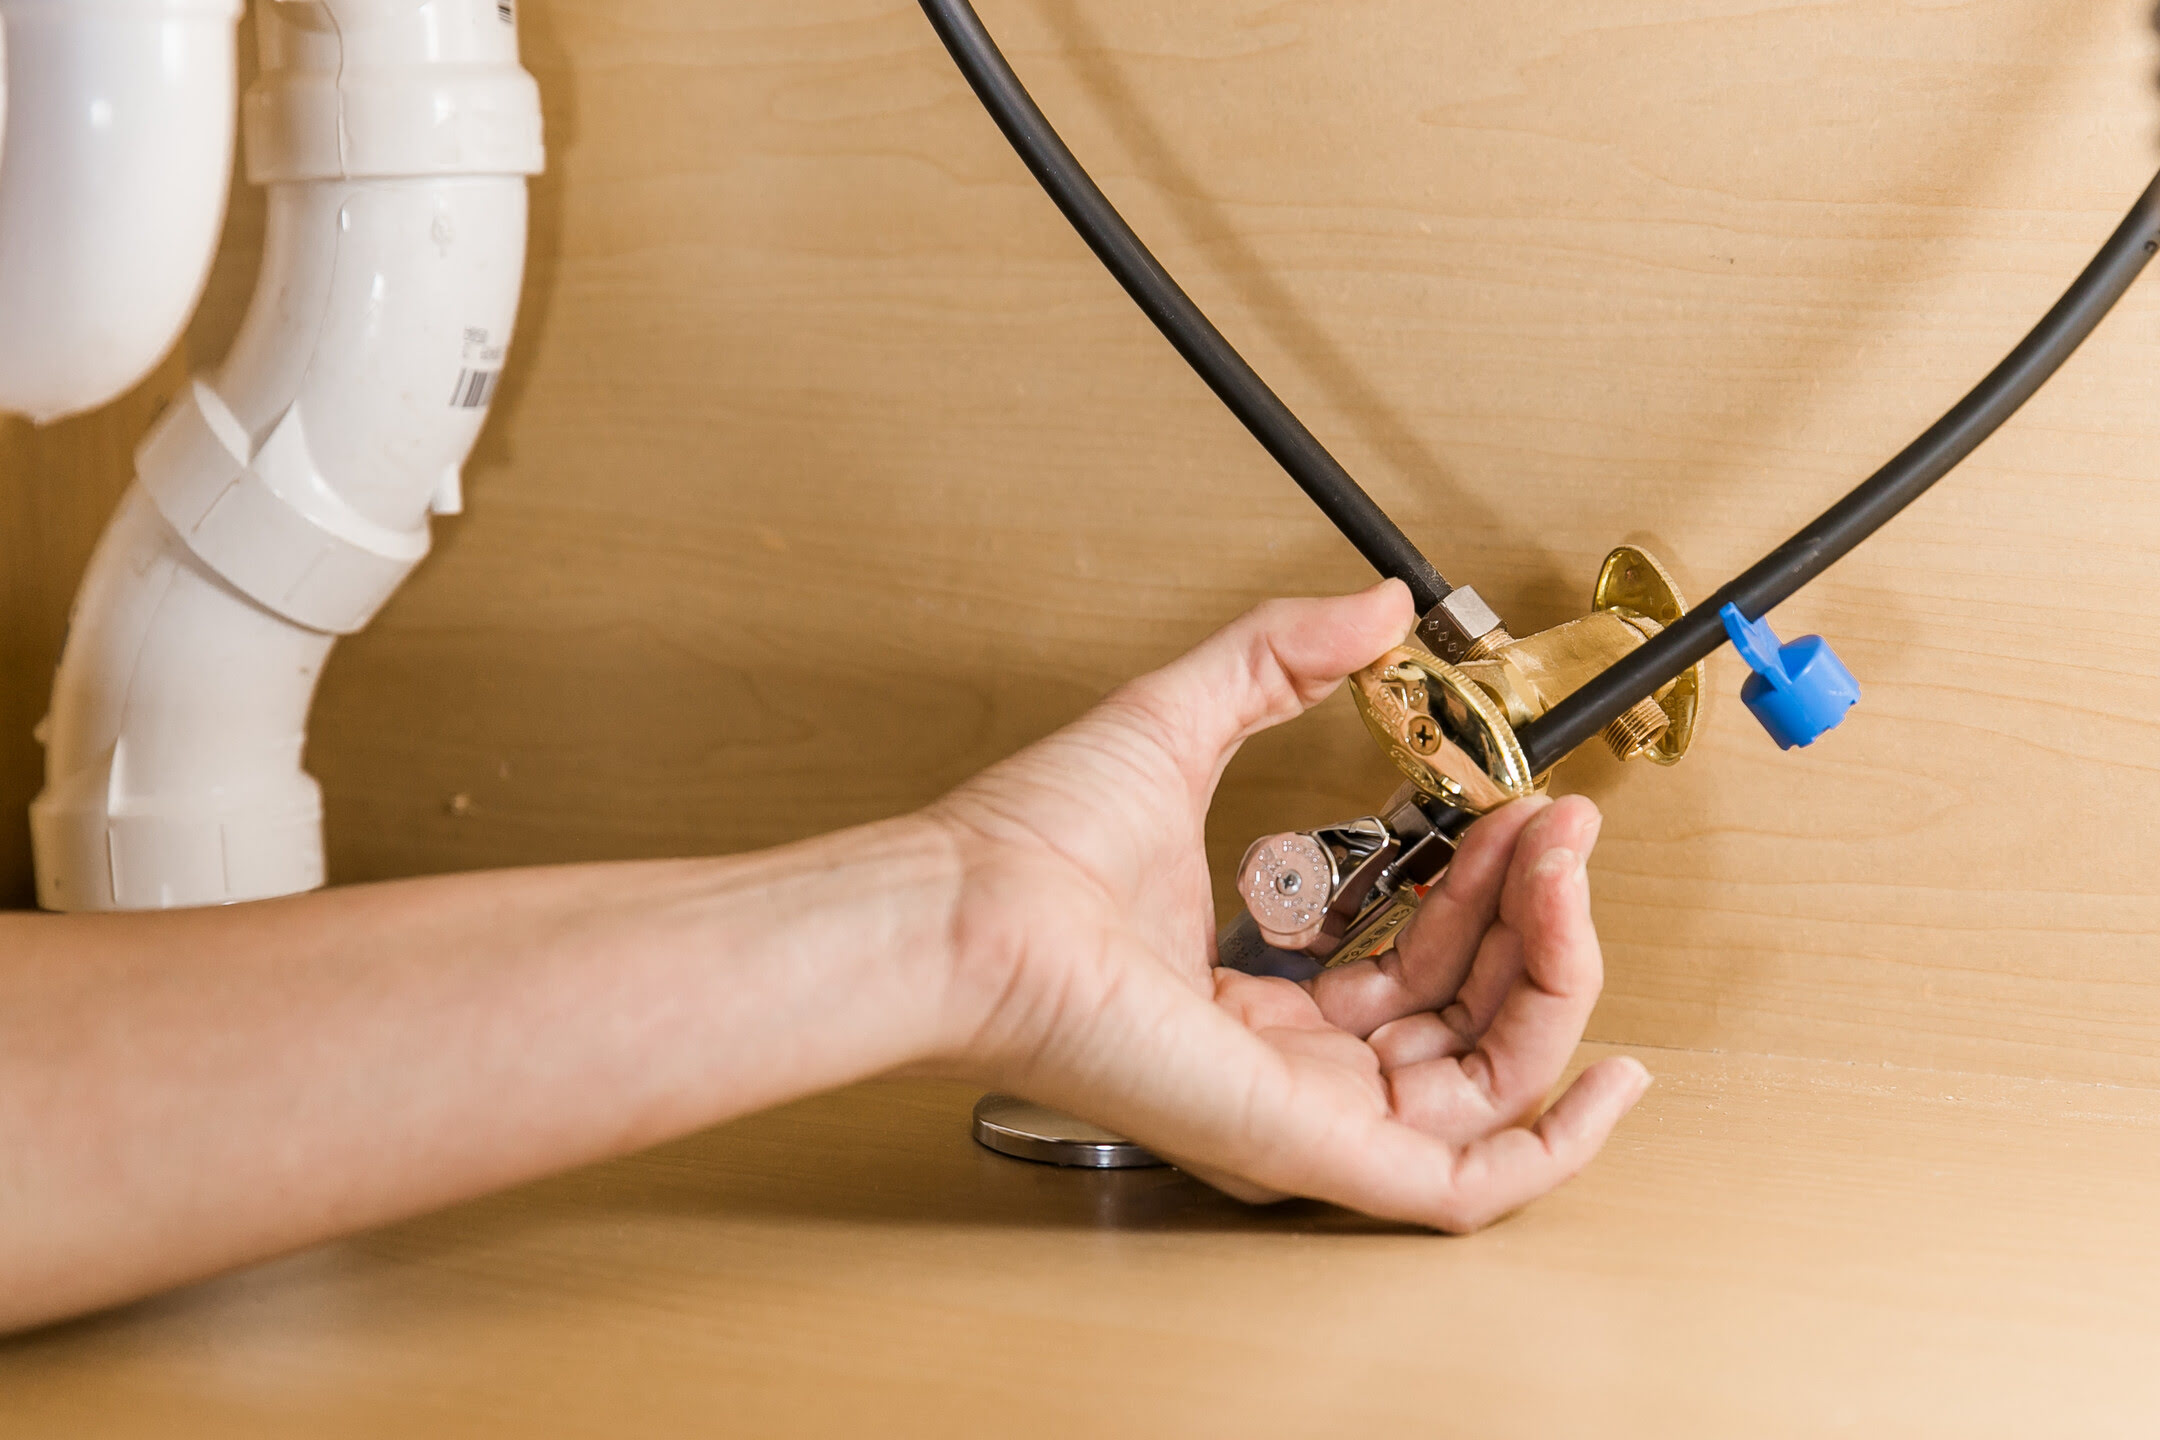 How To Replace Water Valve Under Sink